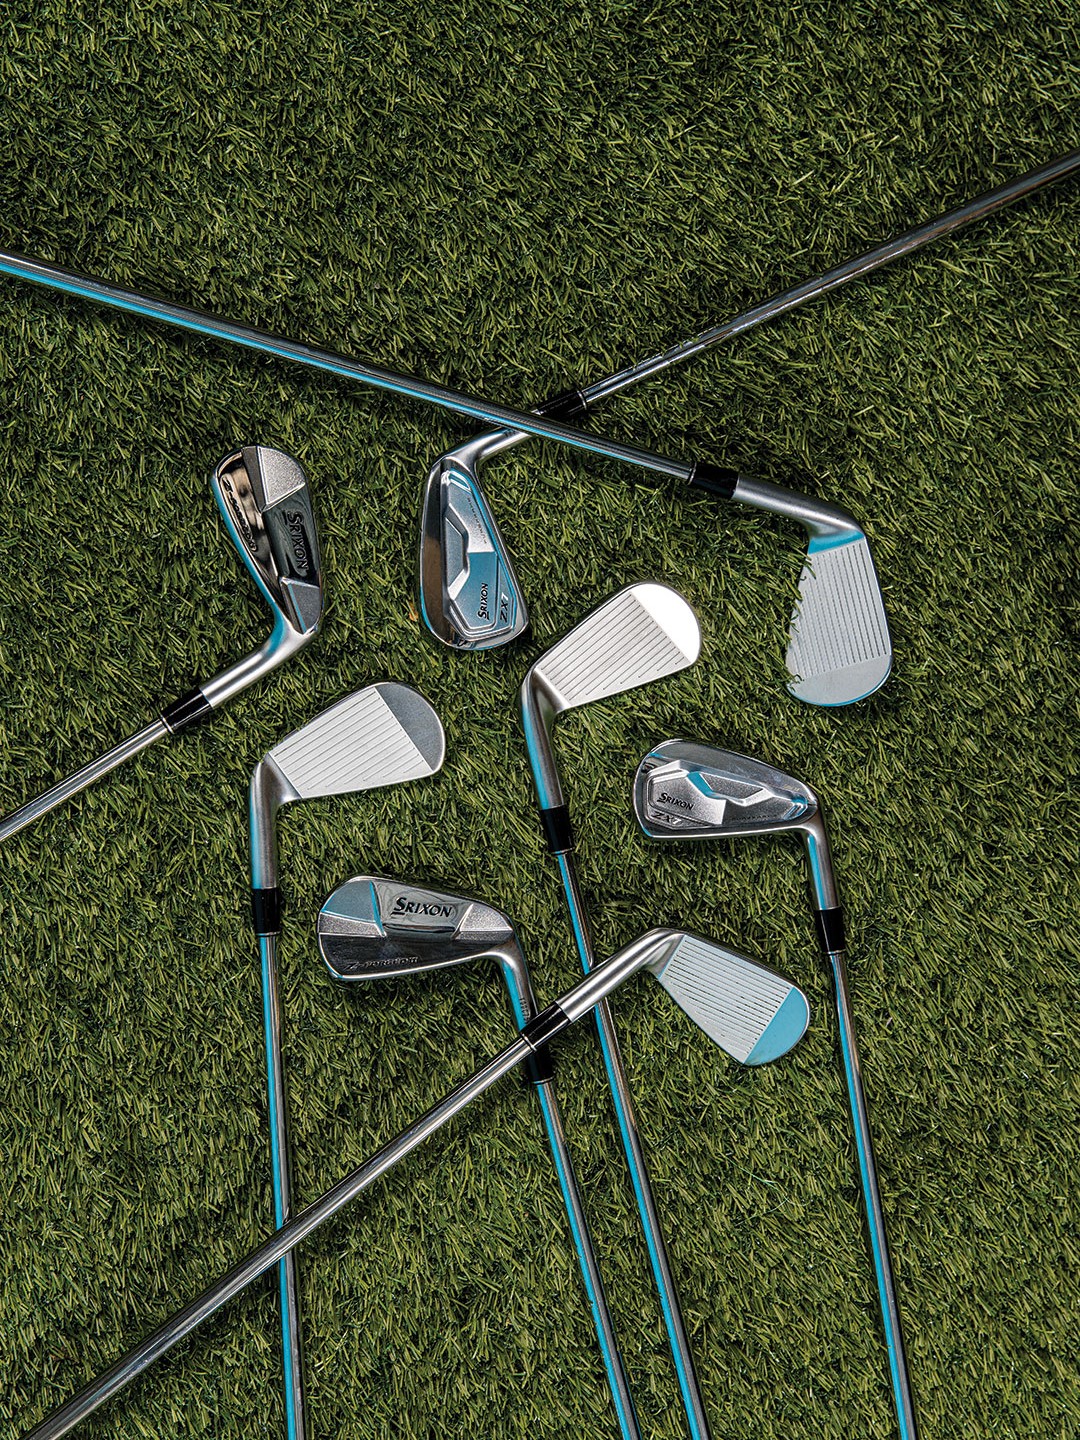 Srixon irons, a go-to for Eric Rislove.